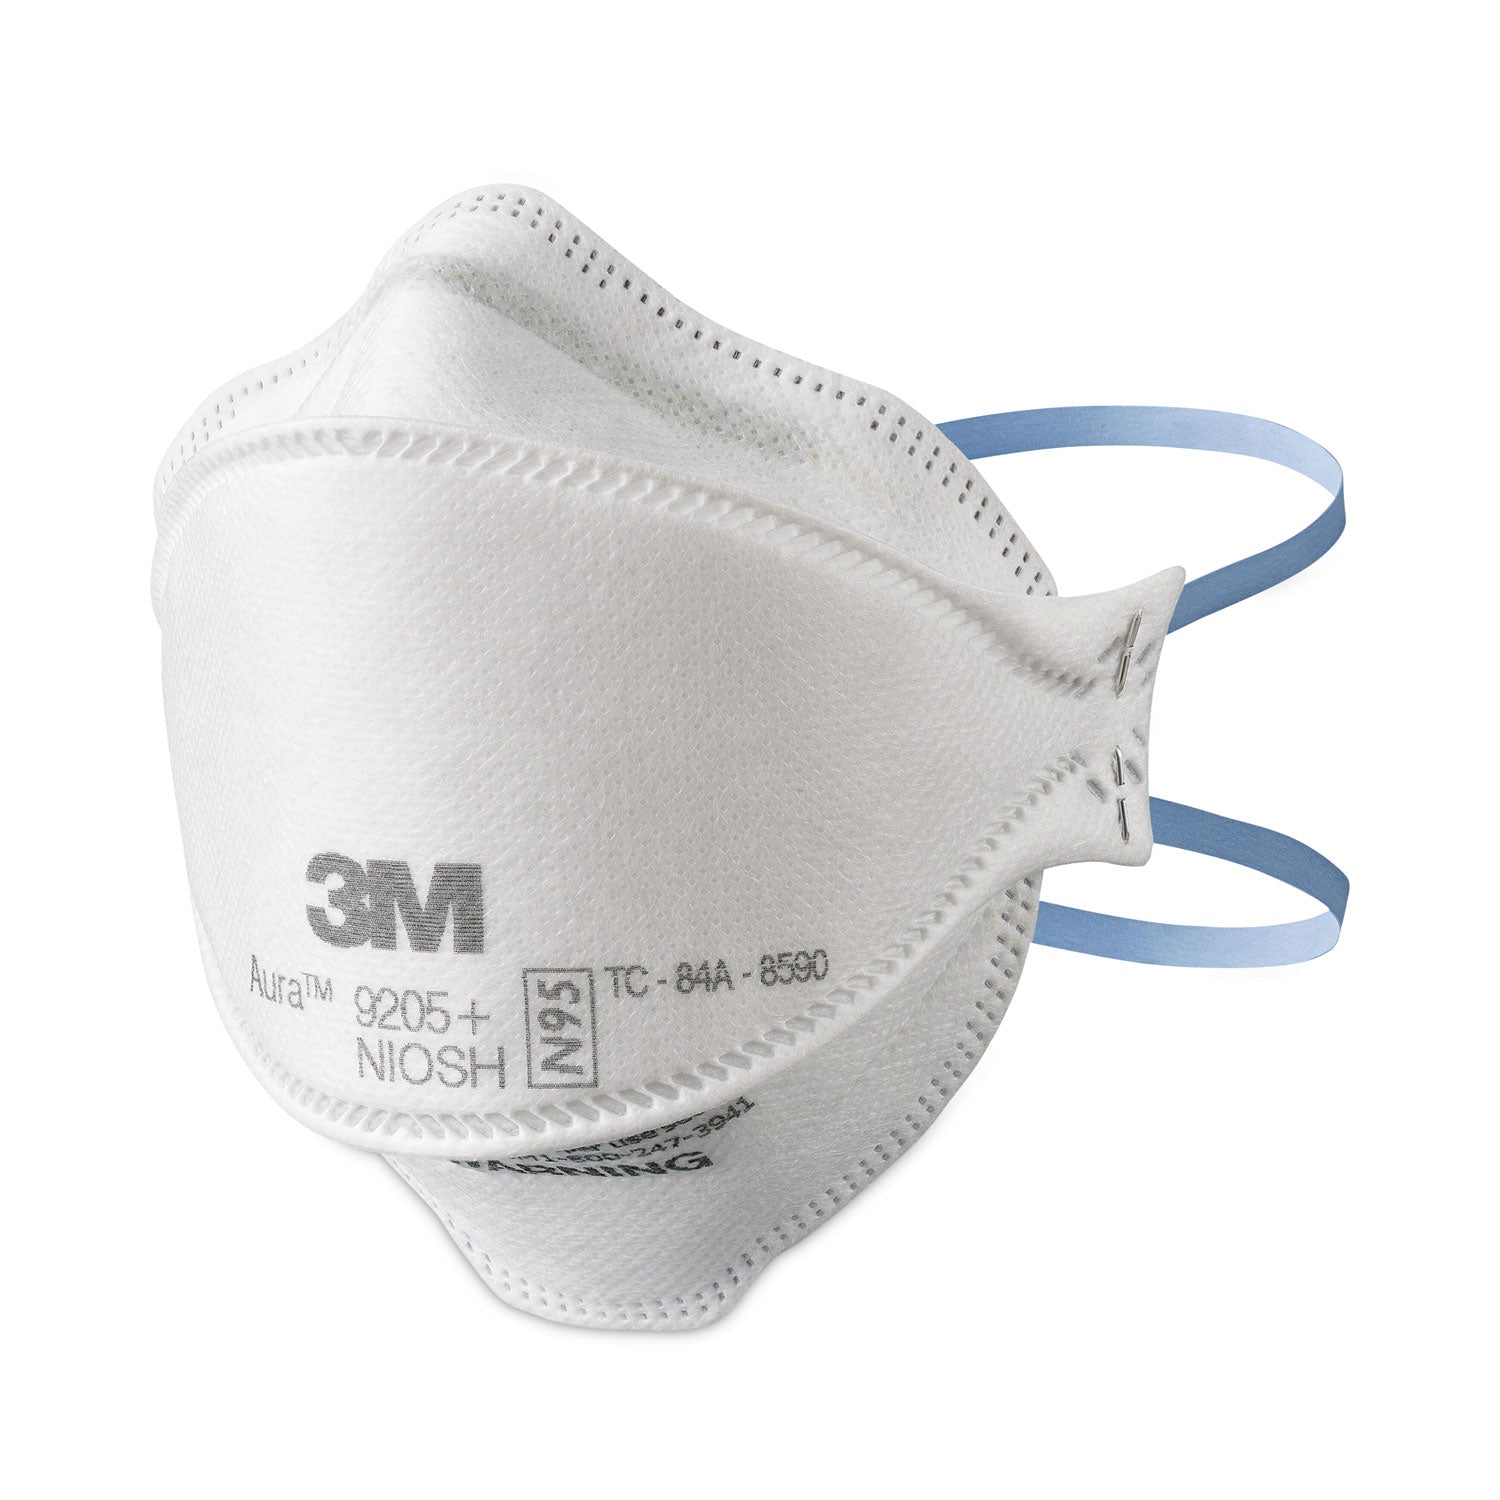 aura-particulate-respirator-9205+-n95-one-size-fits-all-20-pack_mmm9205ph20dc - 1